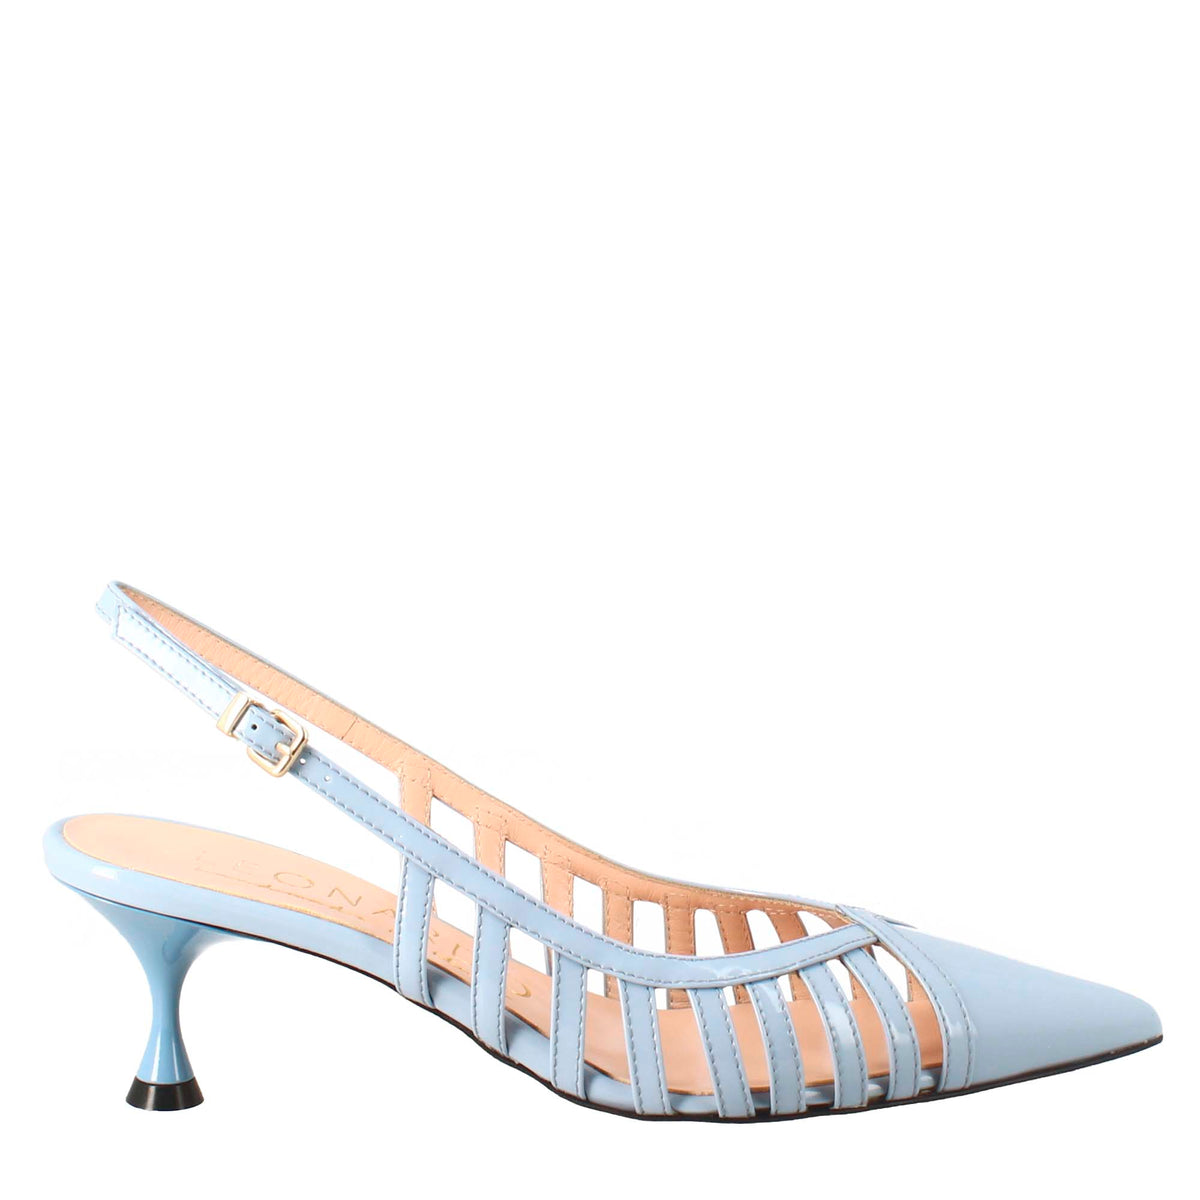 Women's décolleté in light blue patent leather with pointed toe